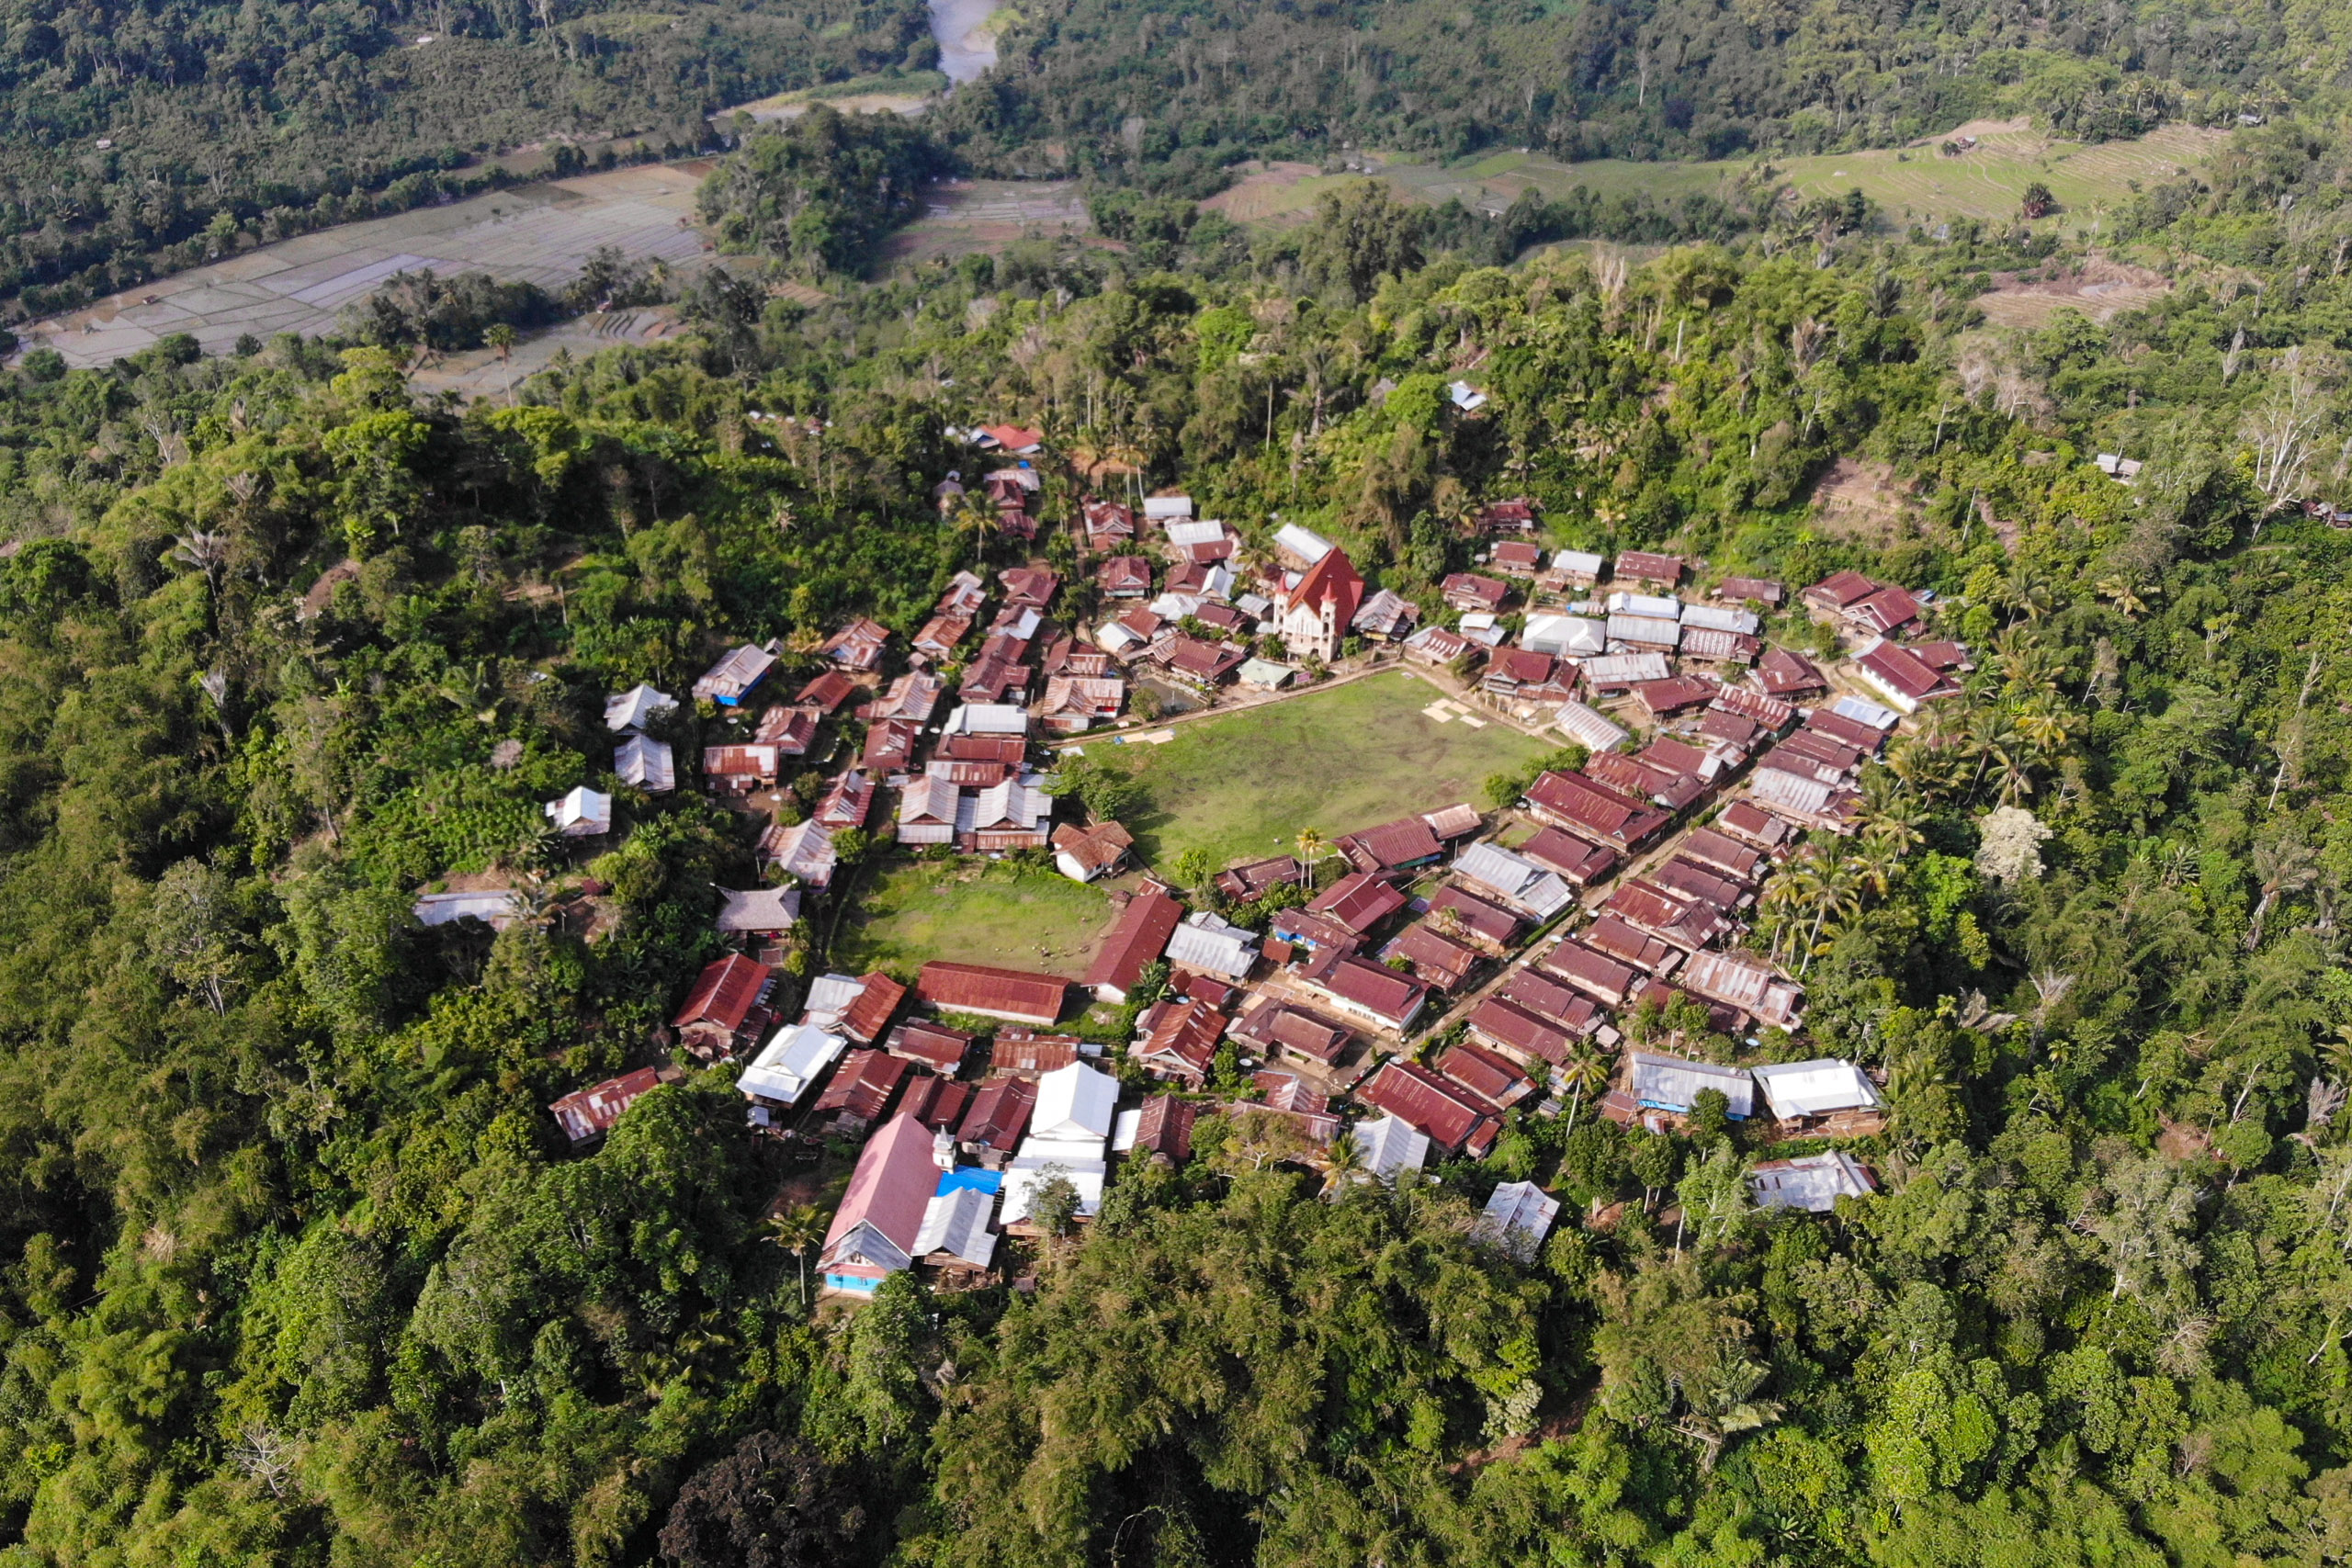 aerial view of a village with densely packed red-roofed houses surrounded by lush green forest